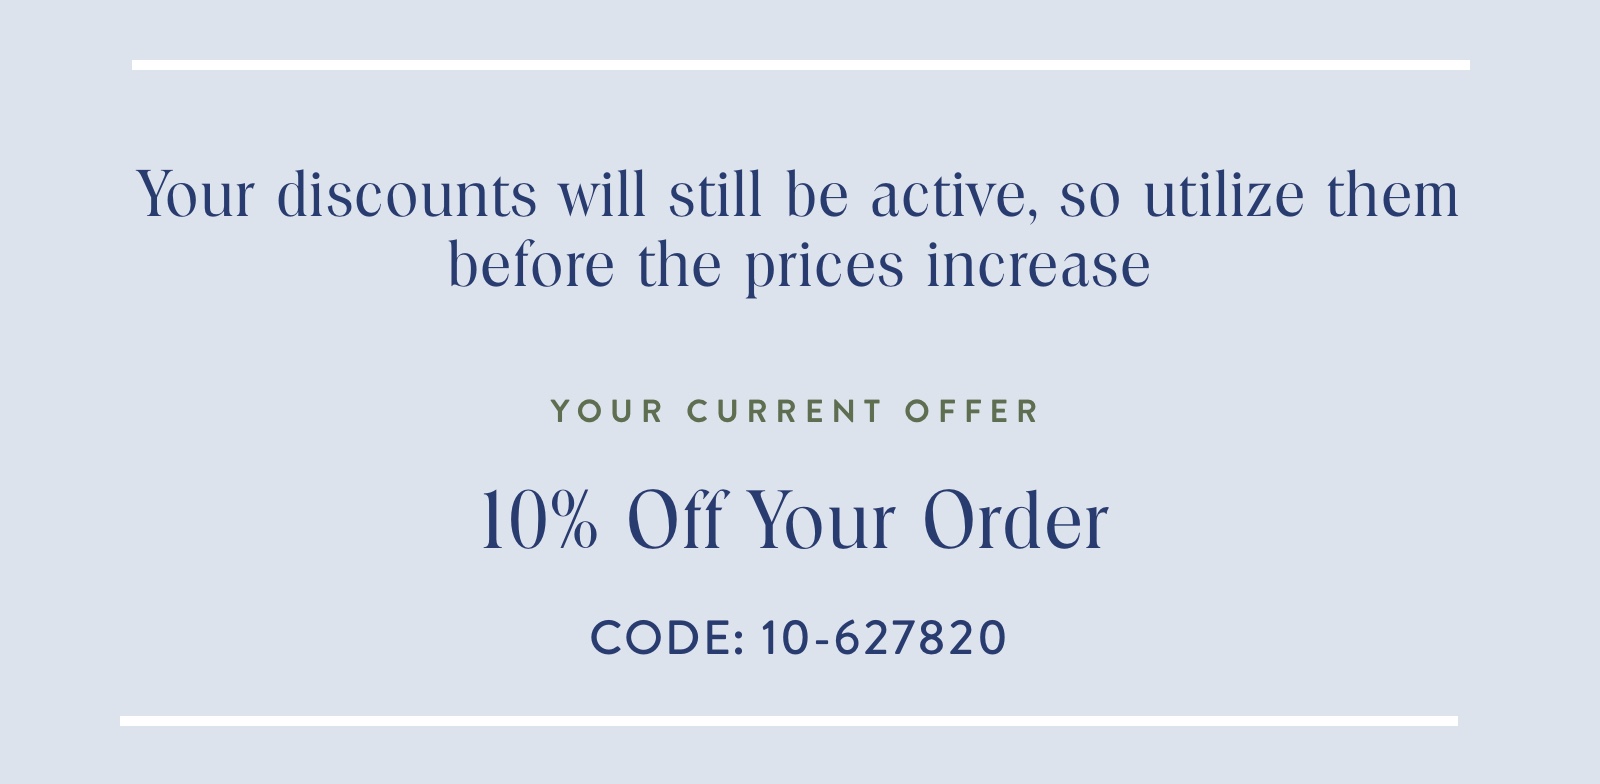 Your discounts will still be active, so utilize them before the prices increase